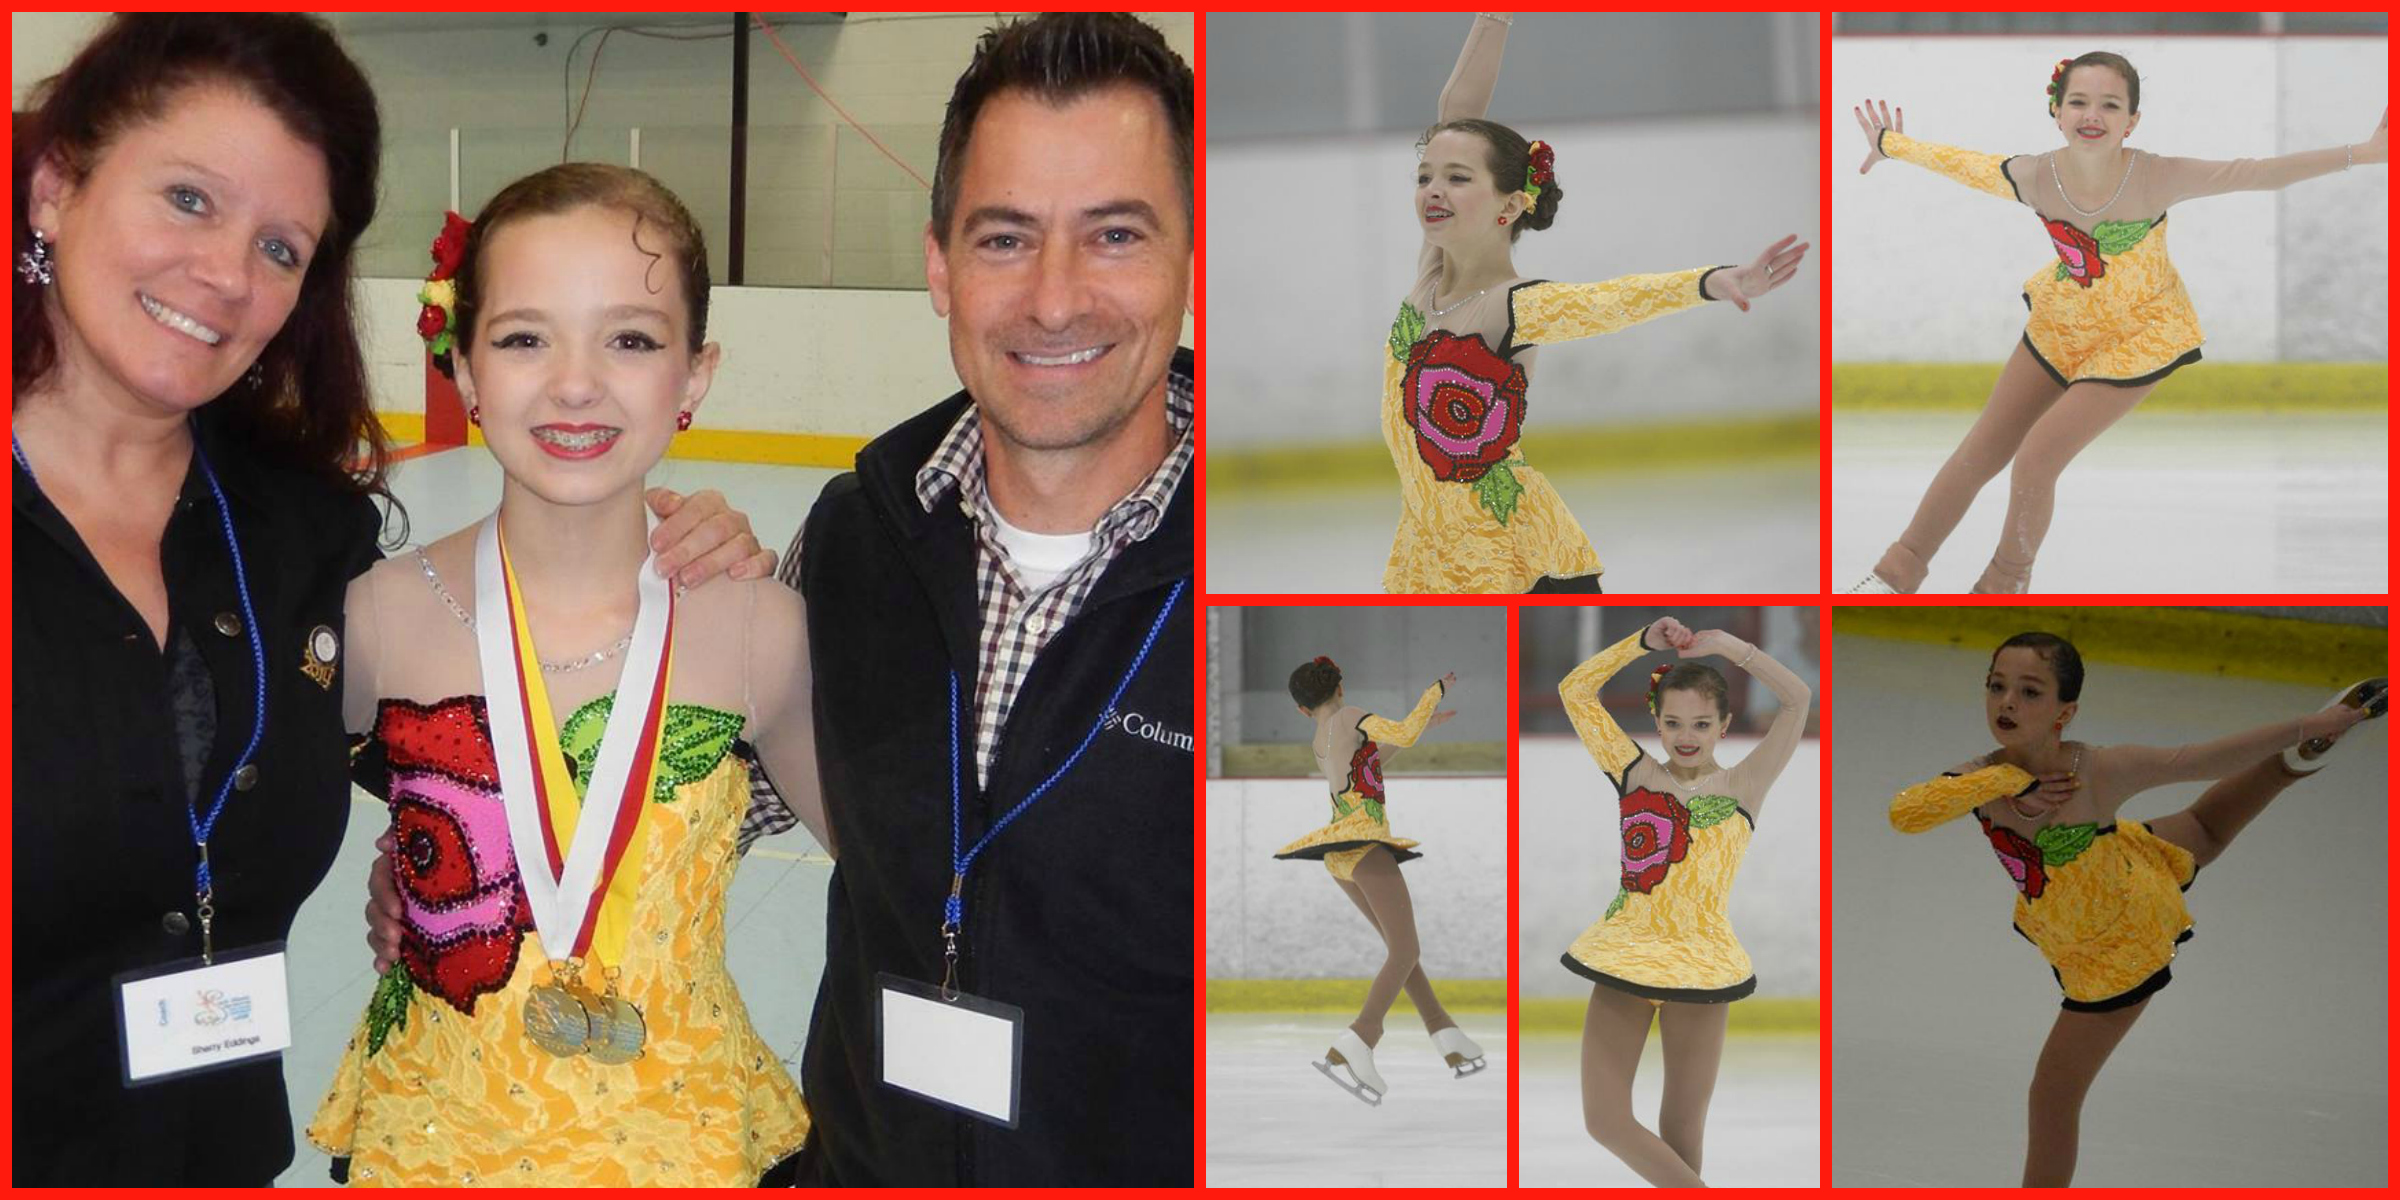 2015 3rd Place South Atlantic Regional Championships for United States Figure Skating